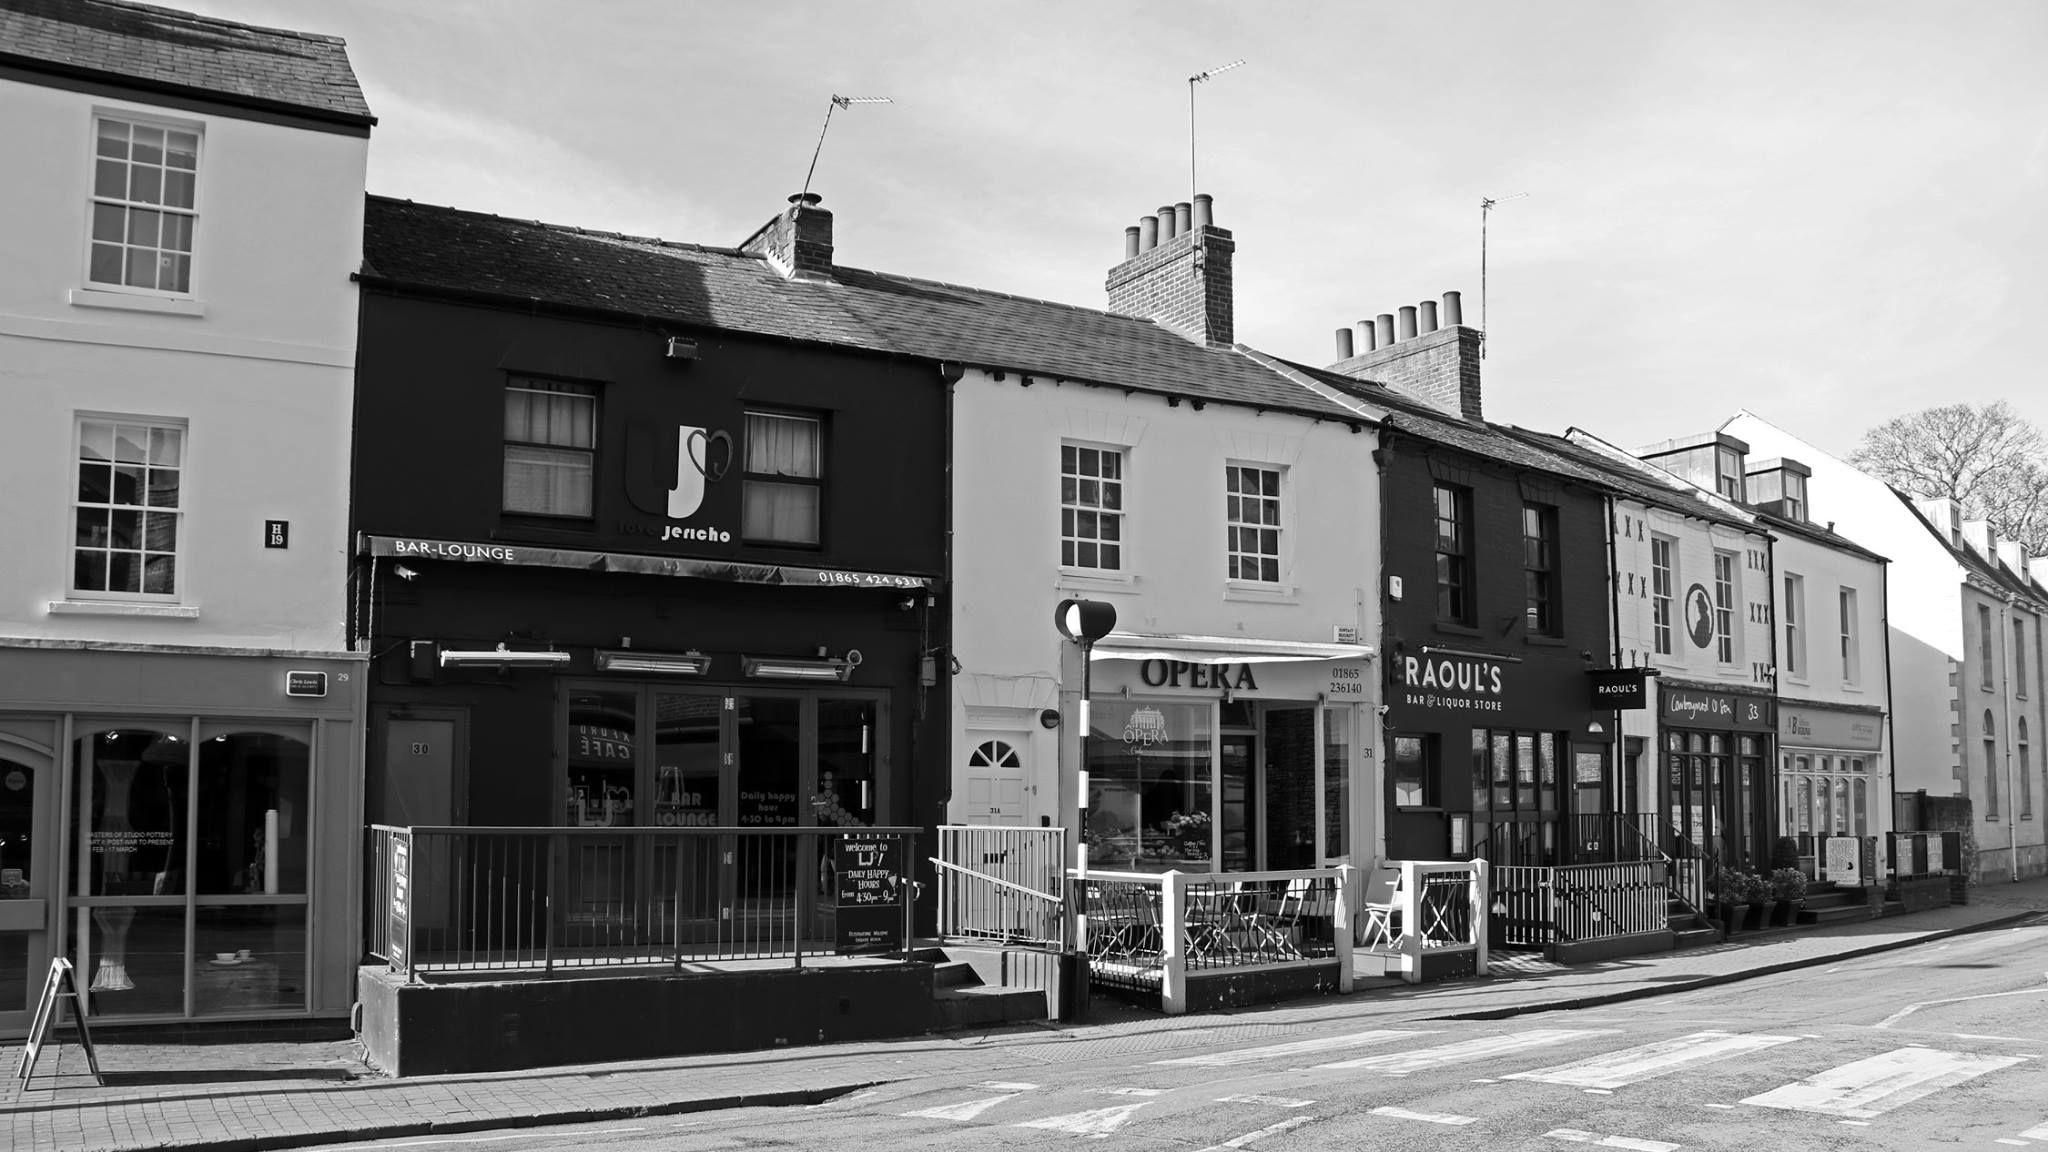 Walton Street shopfronts of Love Jericho bar, Opera Cafe, Raoul's bar and liquor store at one of the street's zebra crossings. This image is in black and white